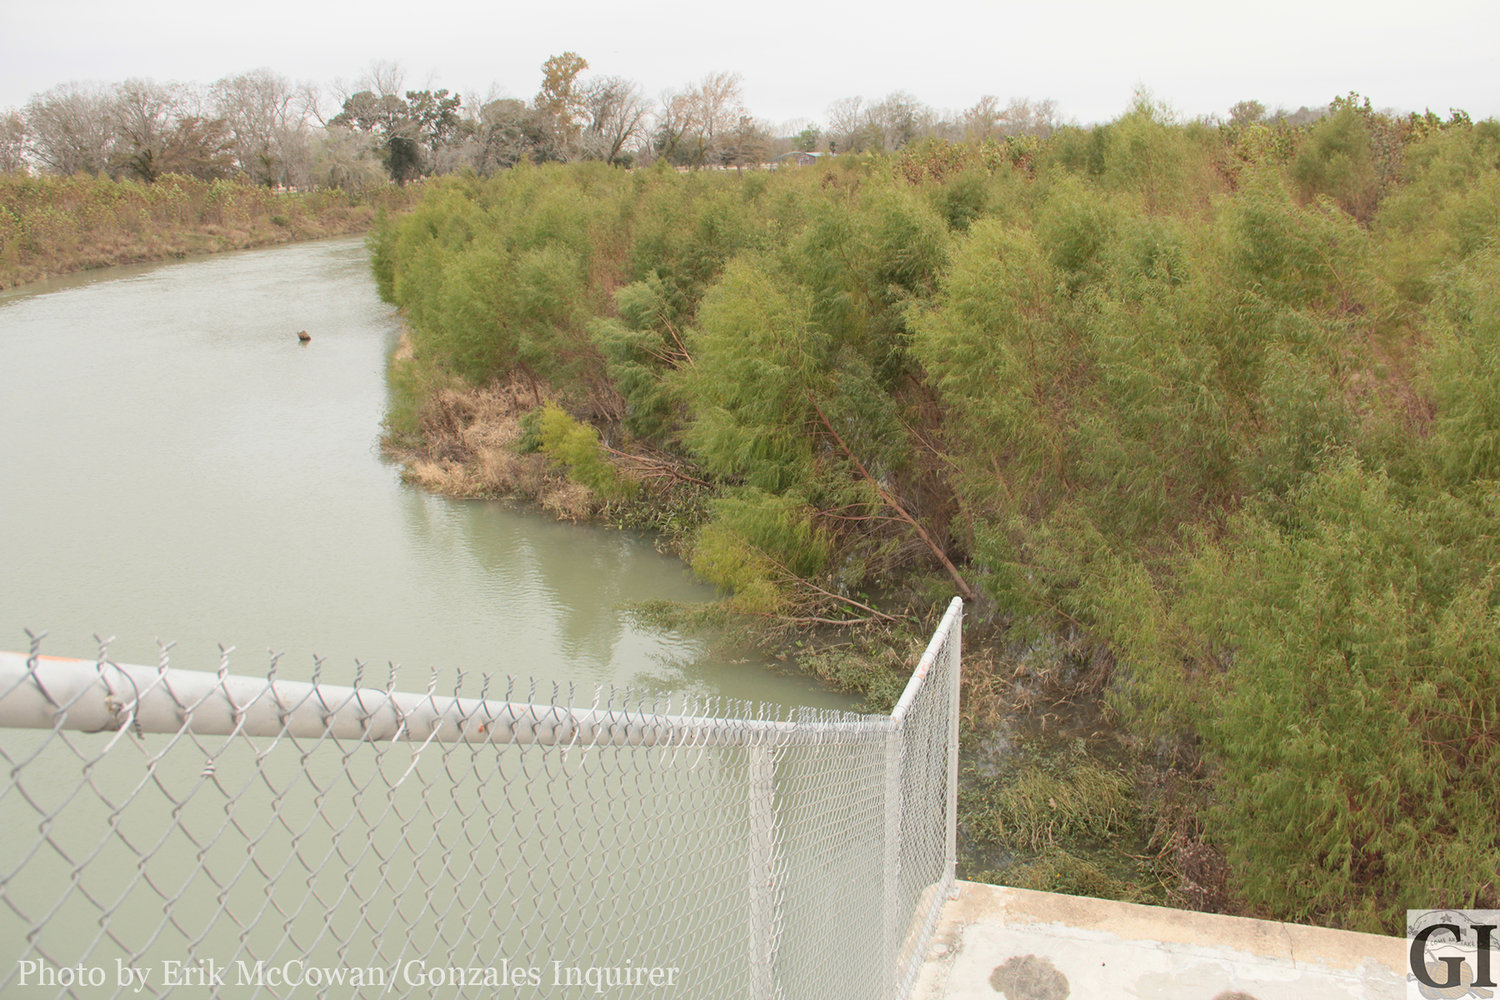 The former lake lost 10 feet of elevation and the water has receded into its natural Guadalupe River channel. Trees have now taken over the muddy lakebed where fishermen and recreationalists used to roam.